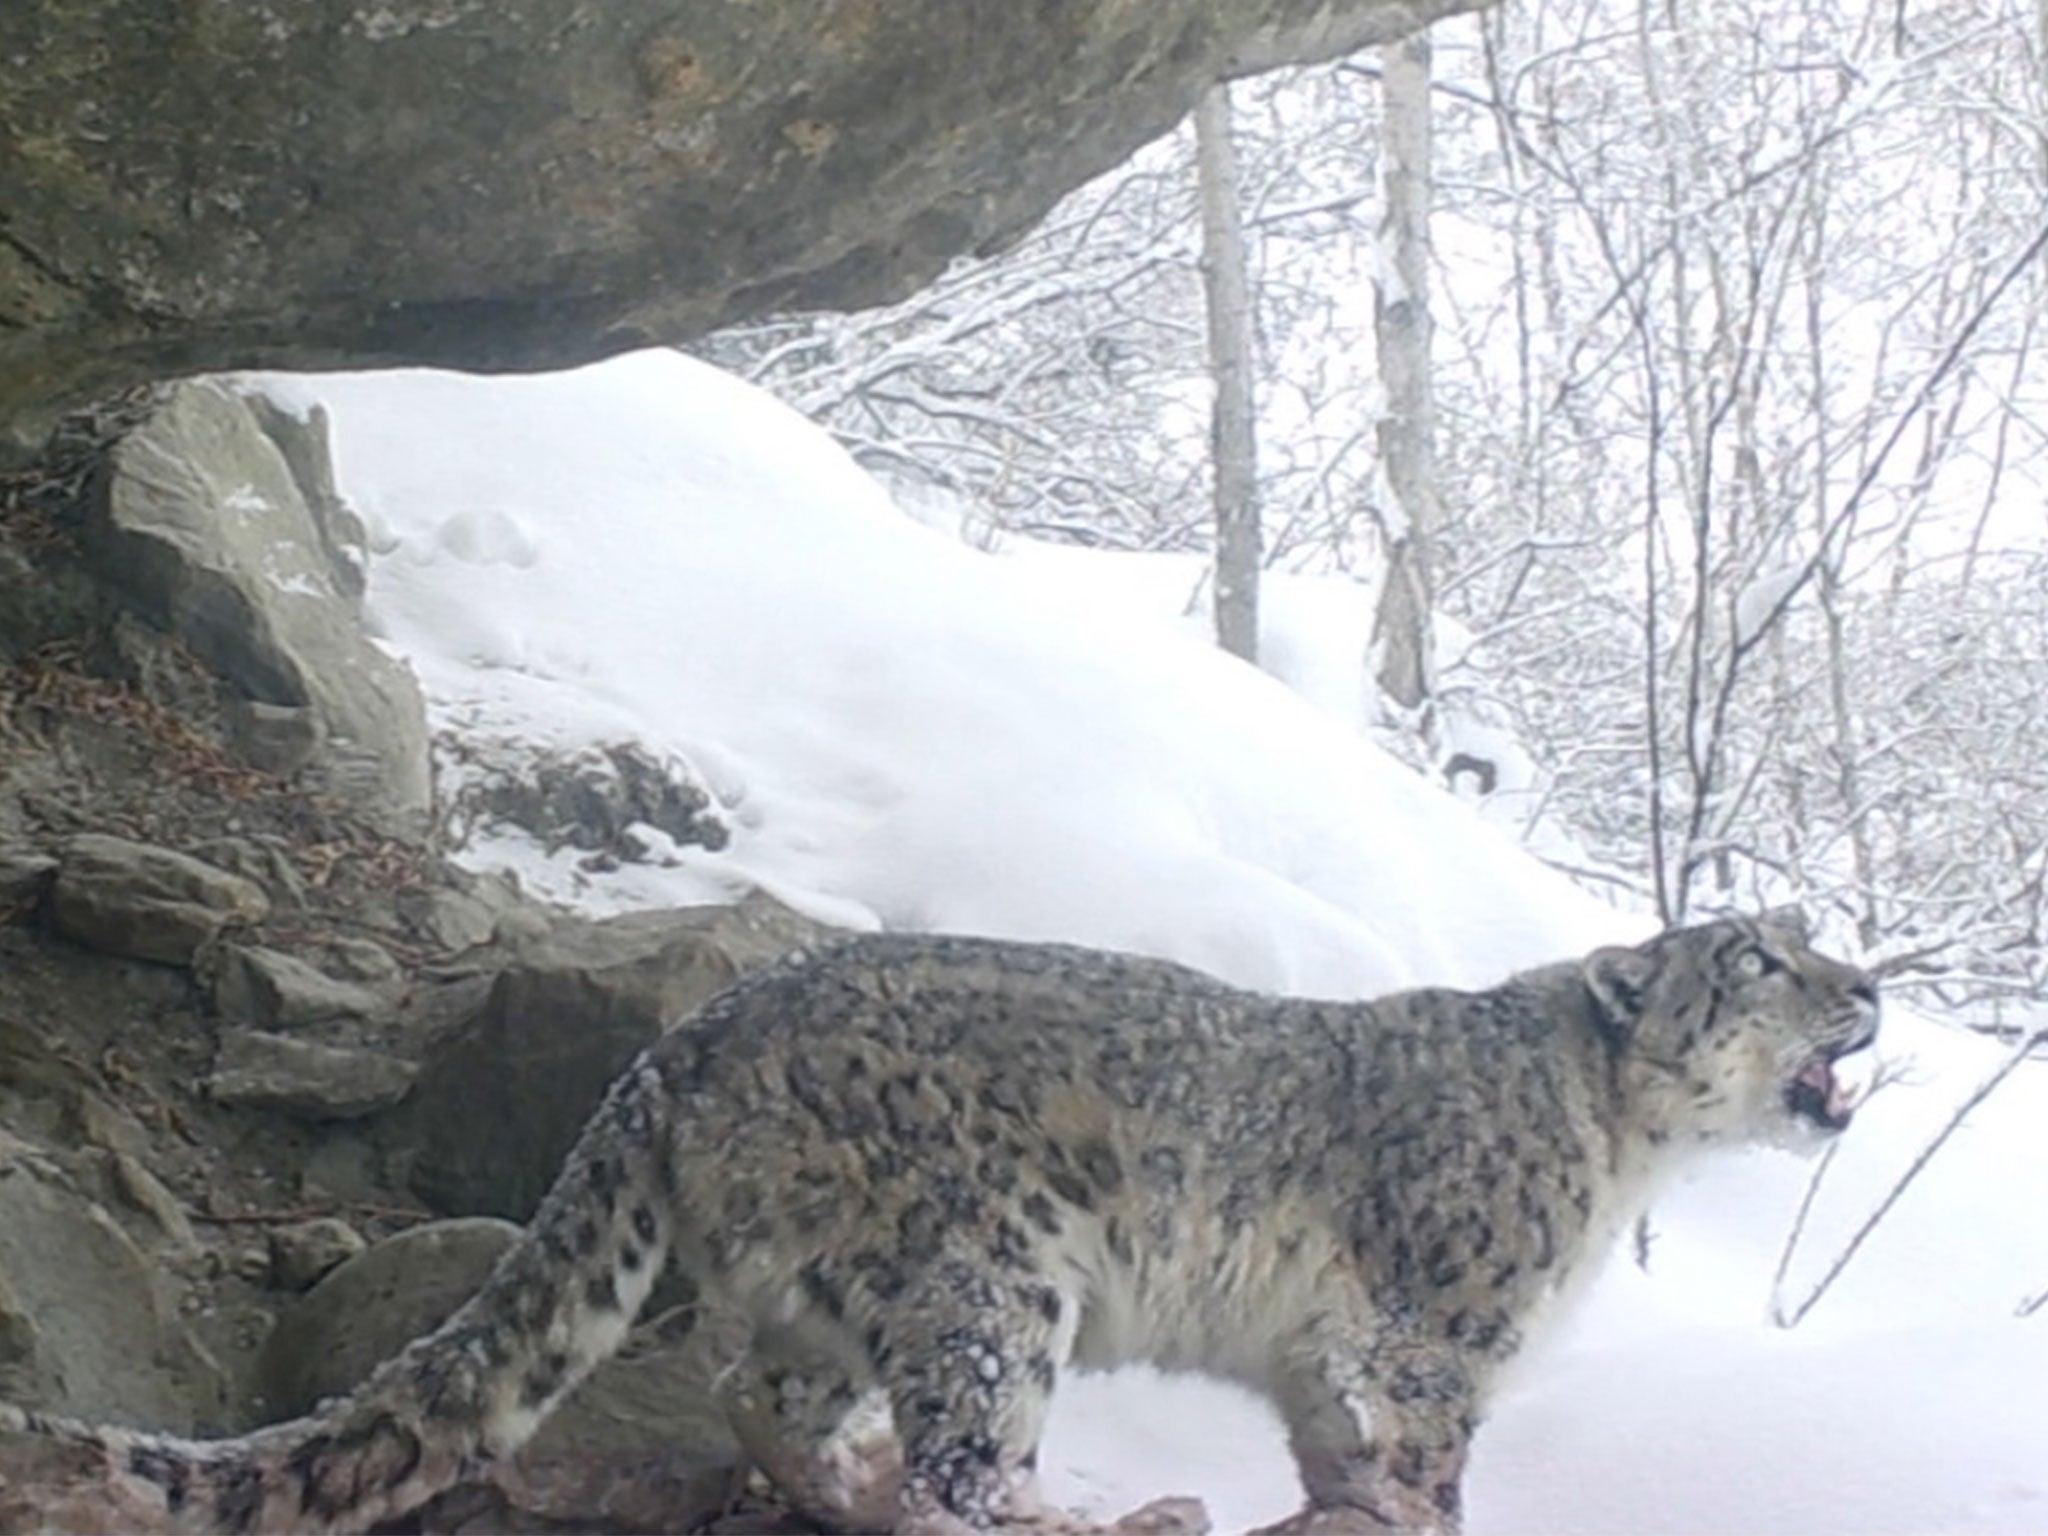 Endangered Snow Leopard Calls Out To Mark Territory In Extremely Rare Video The Independent The Independent